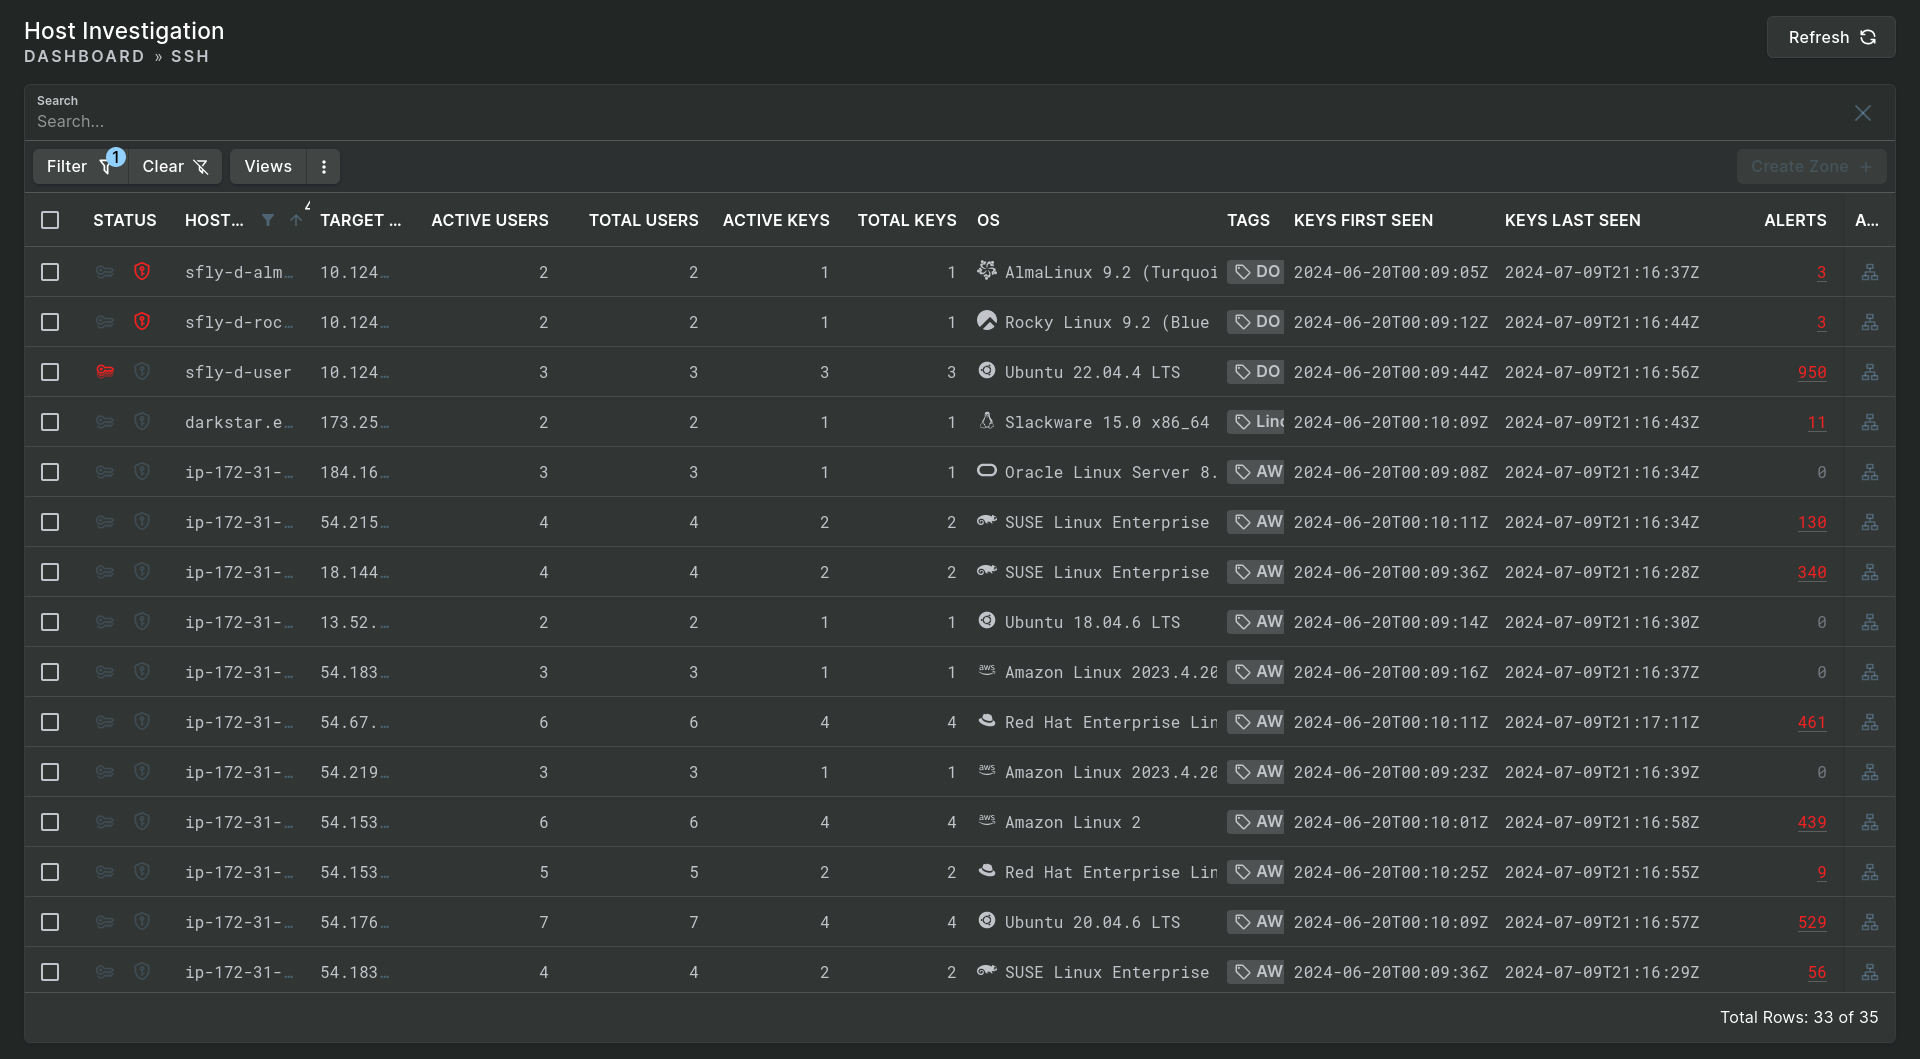 A screenshot of the Host Investigation data table